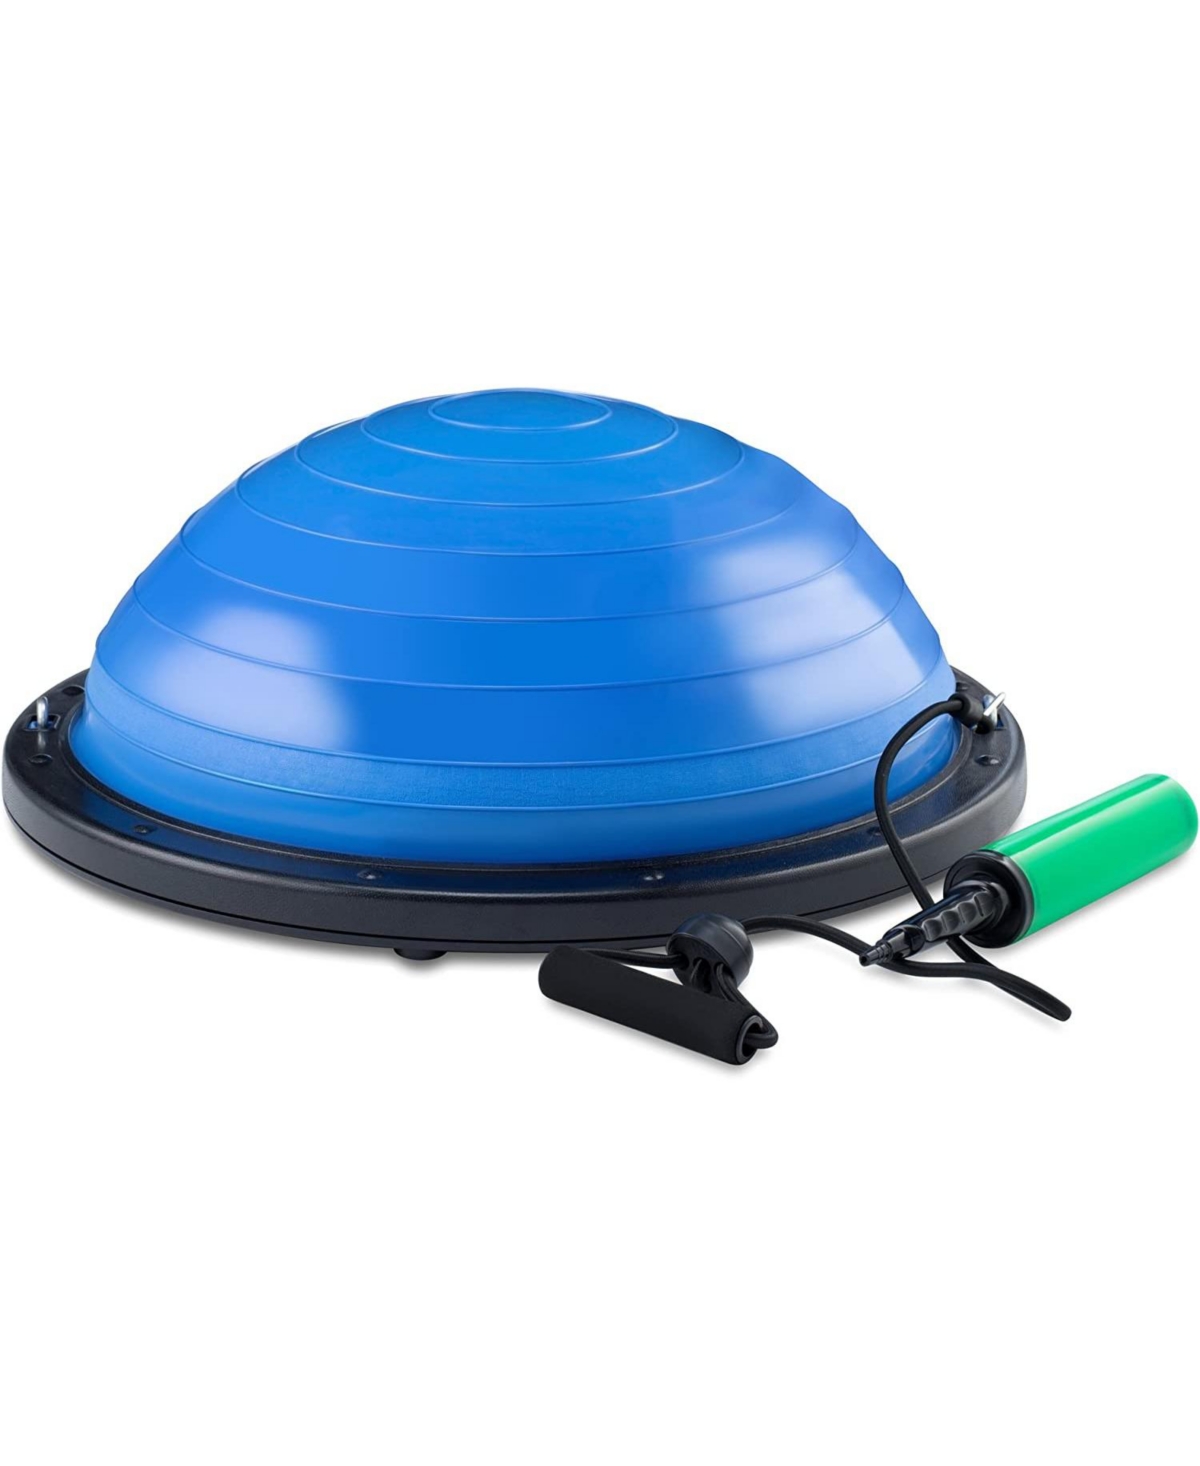 Balance Ball with Resistance Bands & Pump - Balance Trainer, 20" Diameter - Blue and black